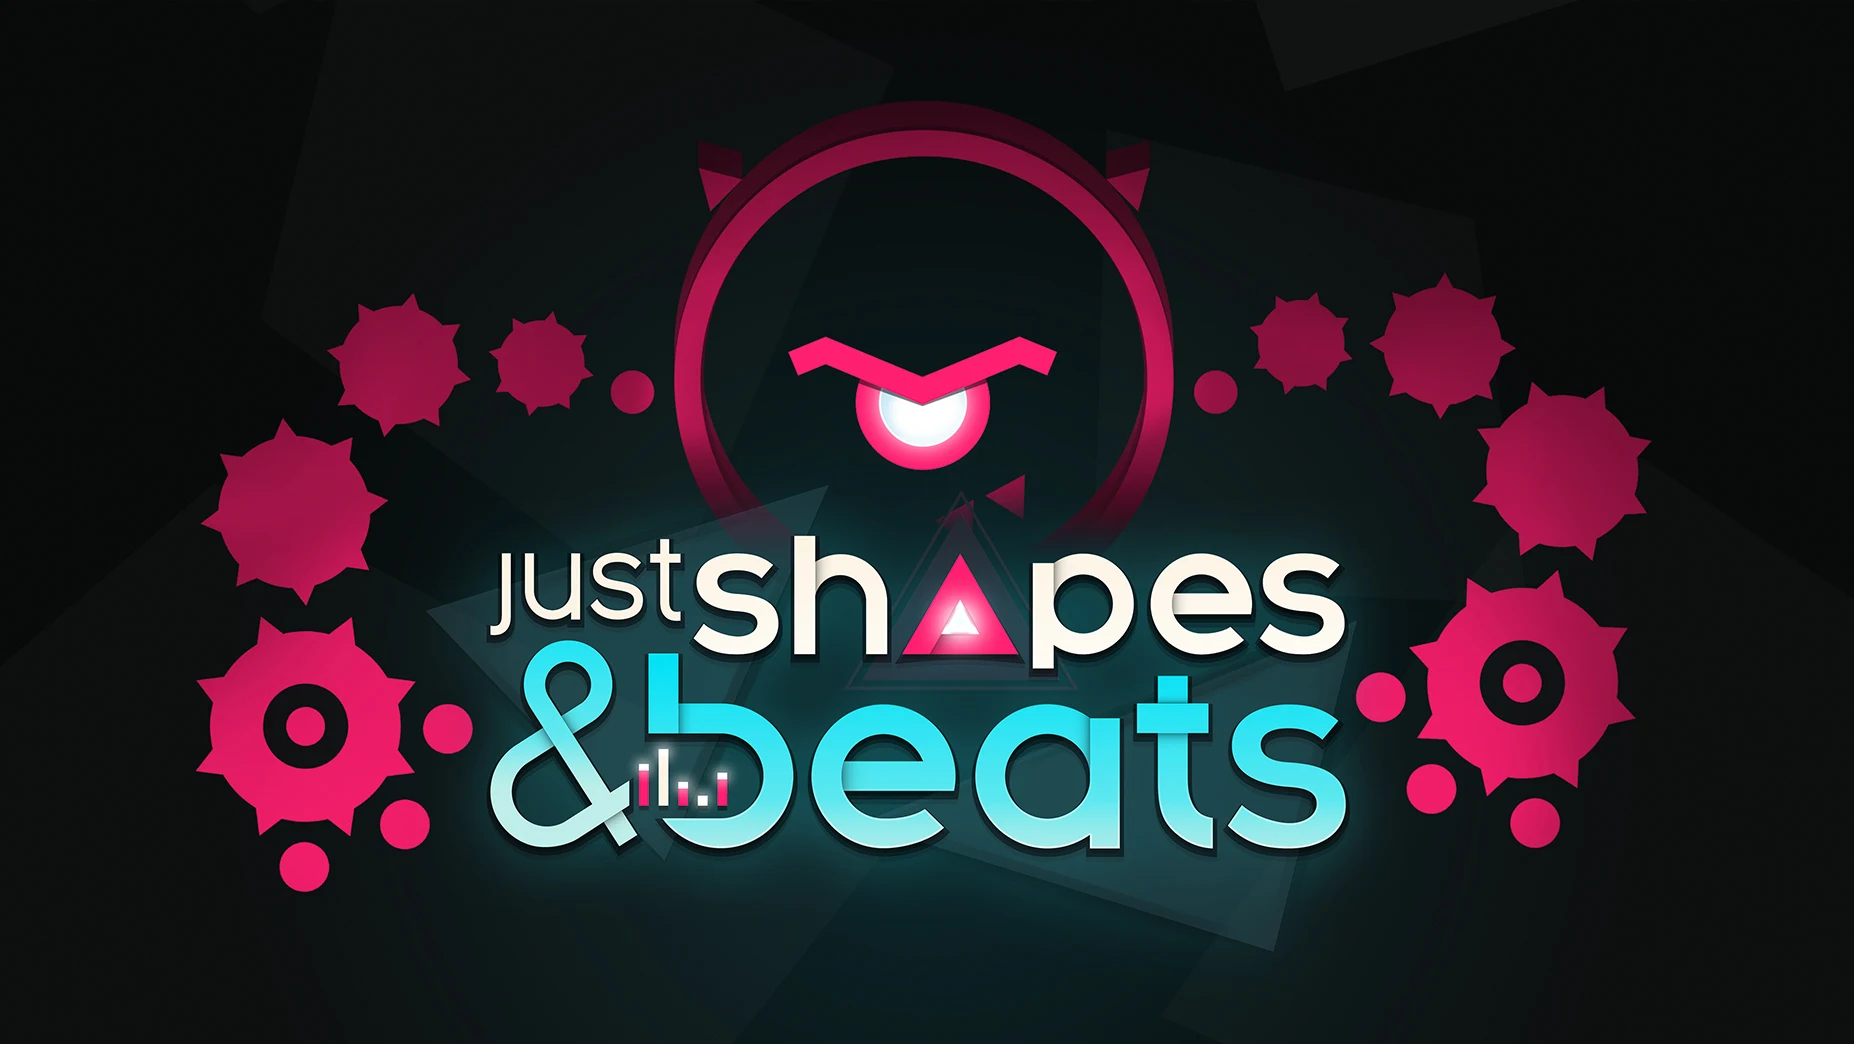 Crossing The Streams — Just Shapes & Beats 